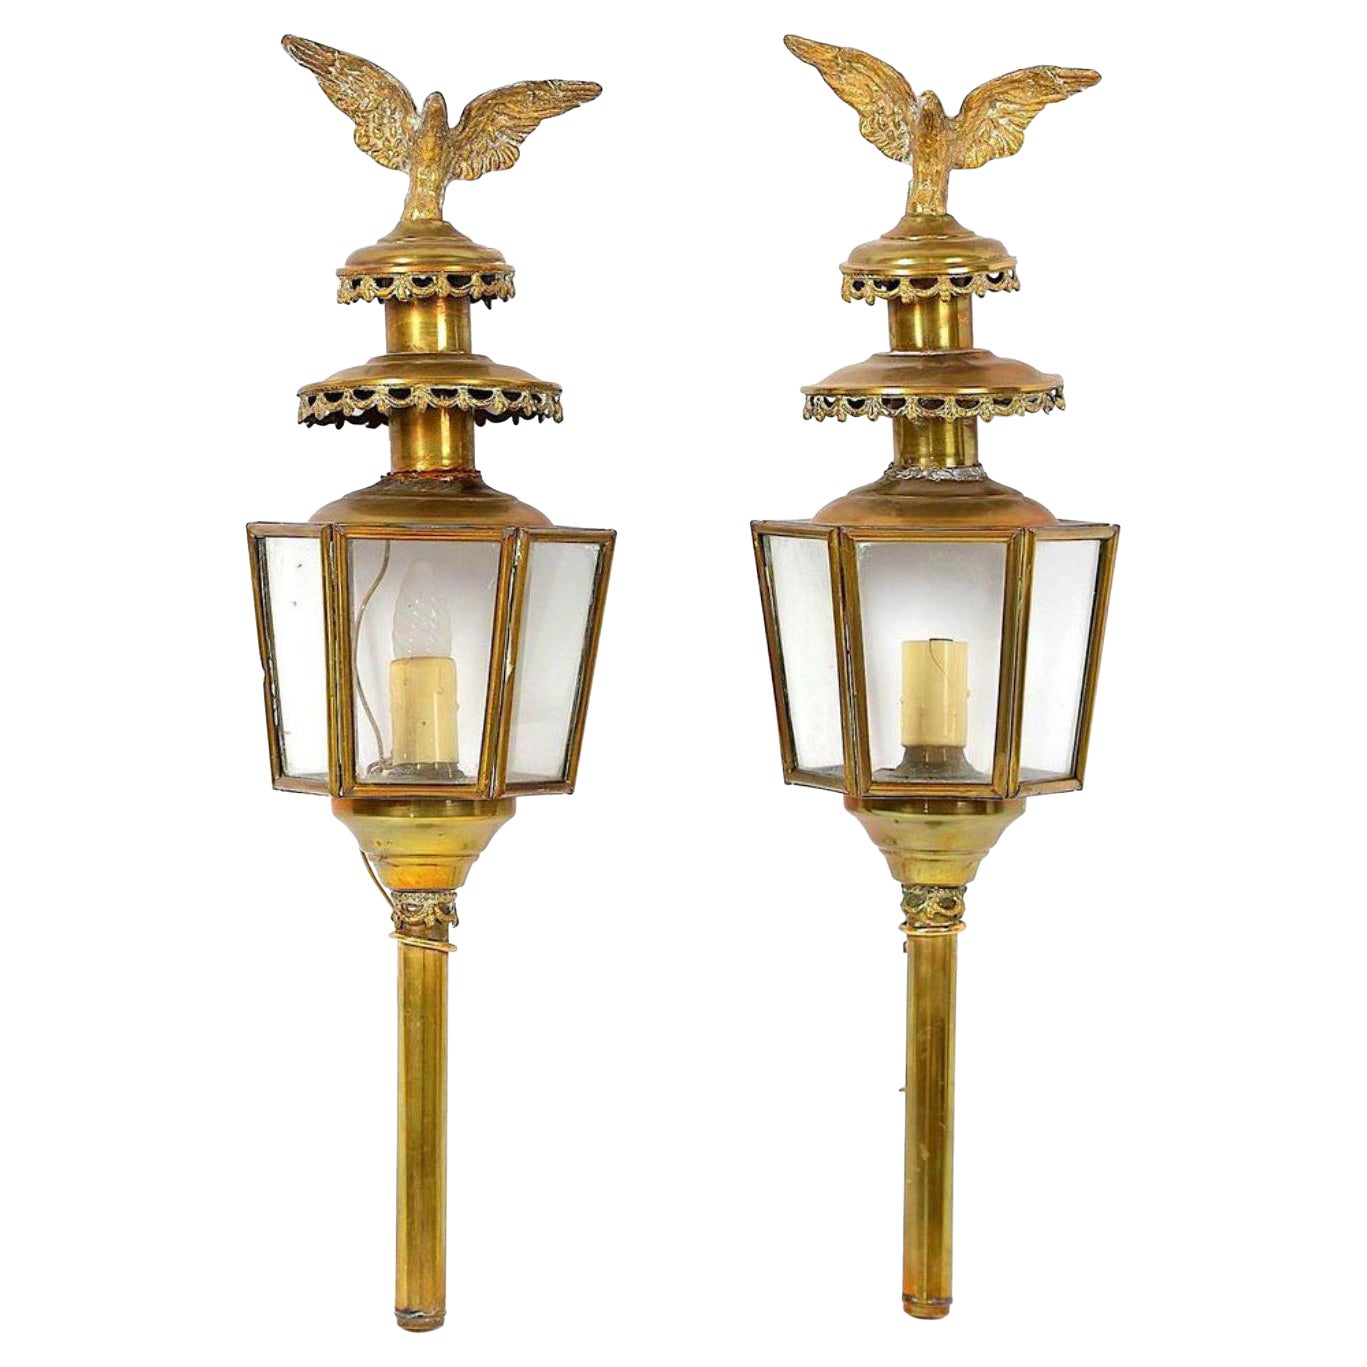 19th Century French Pair of Brass Carriage Lanterns with Eagles on the Top For Sale